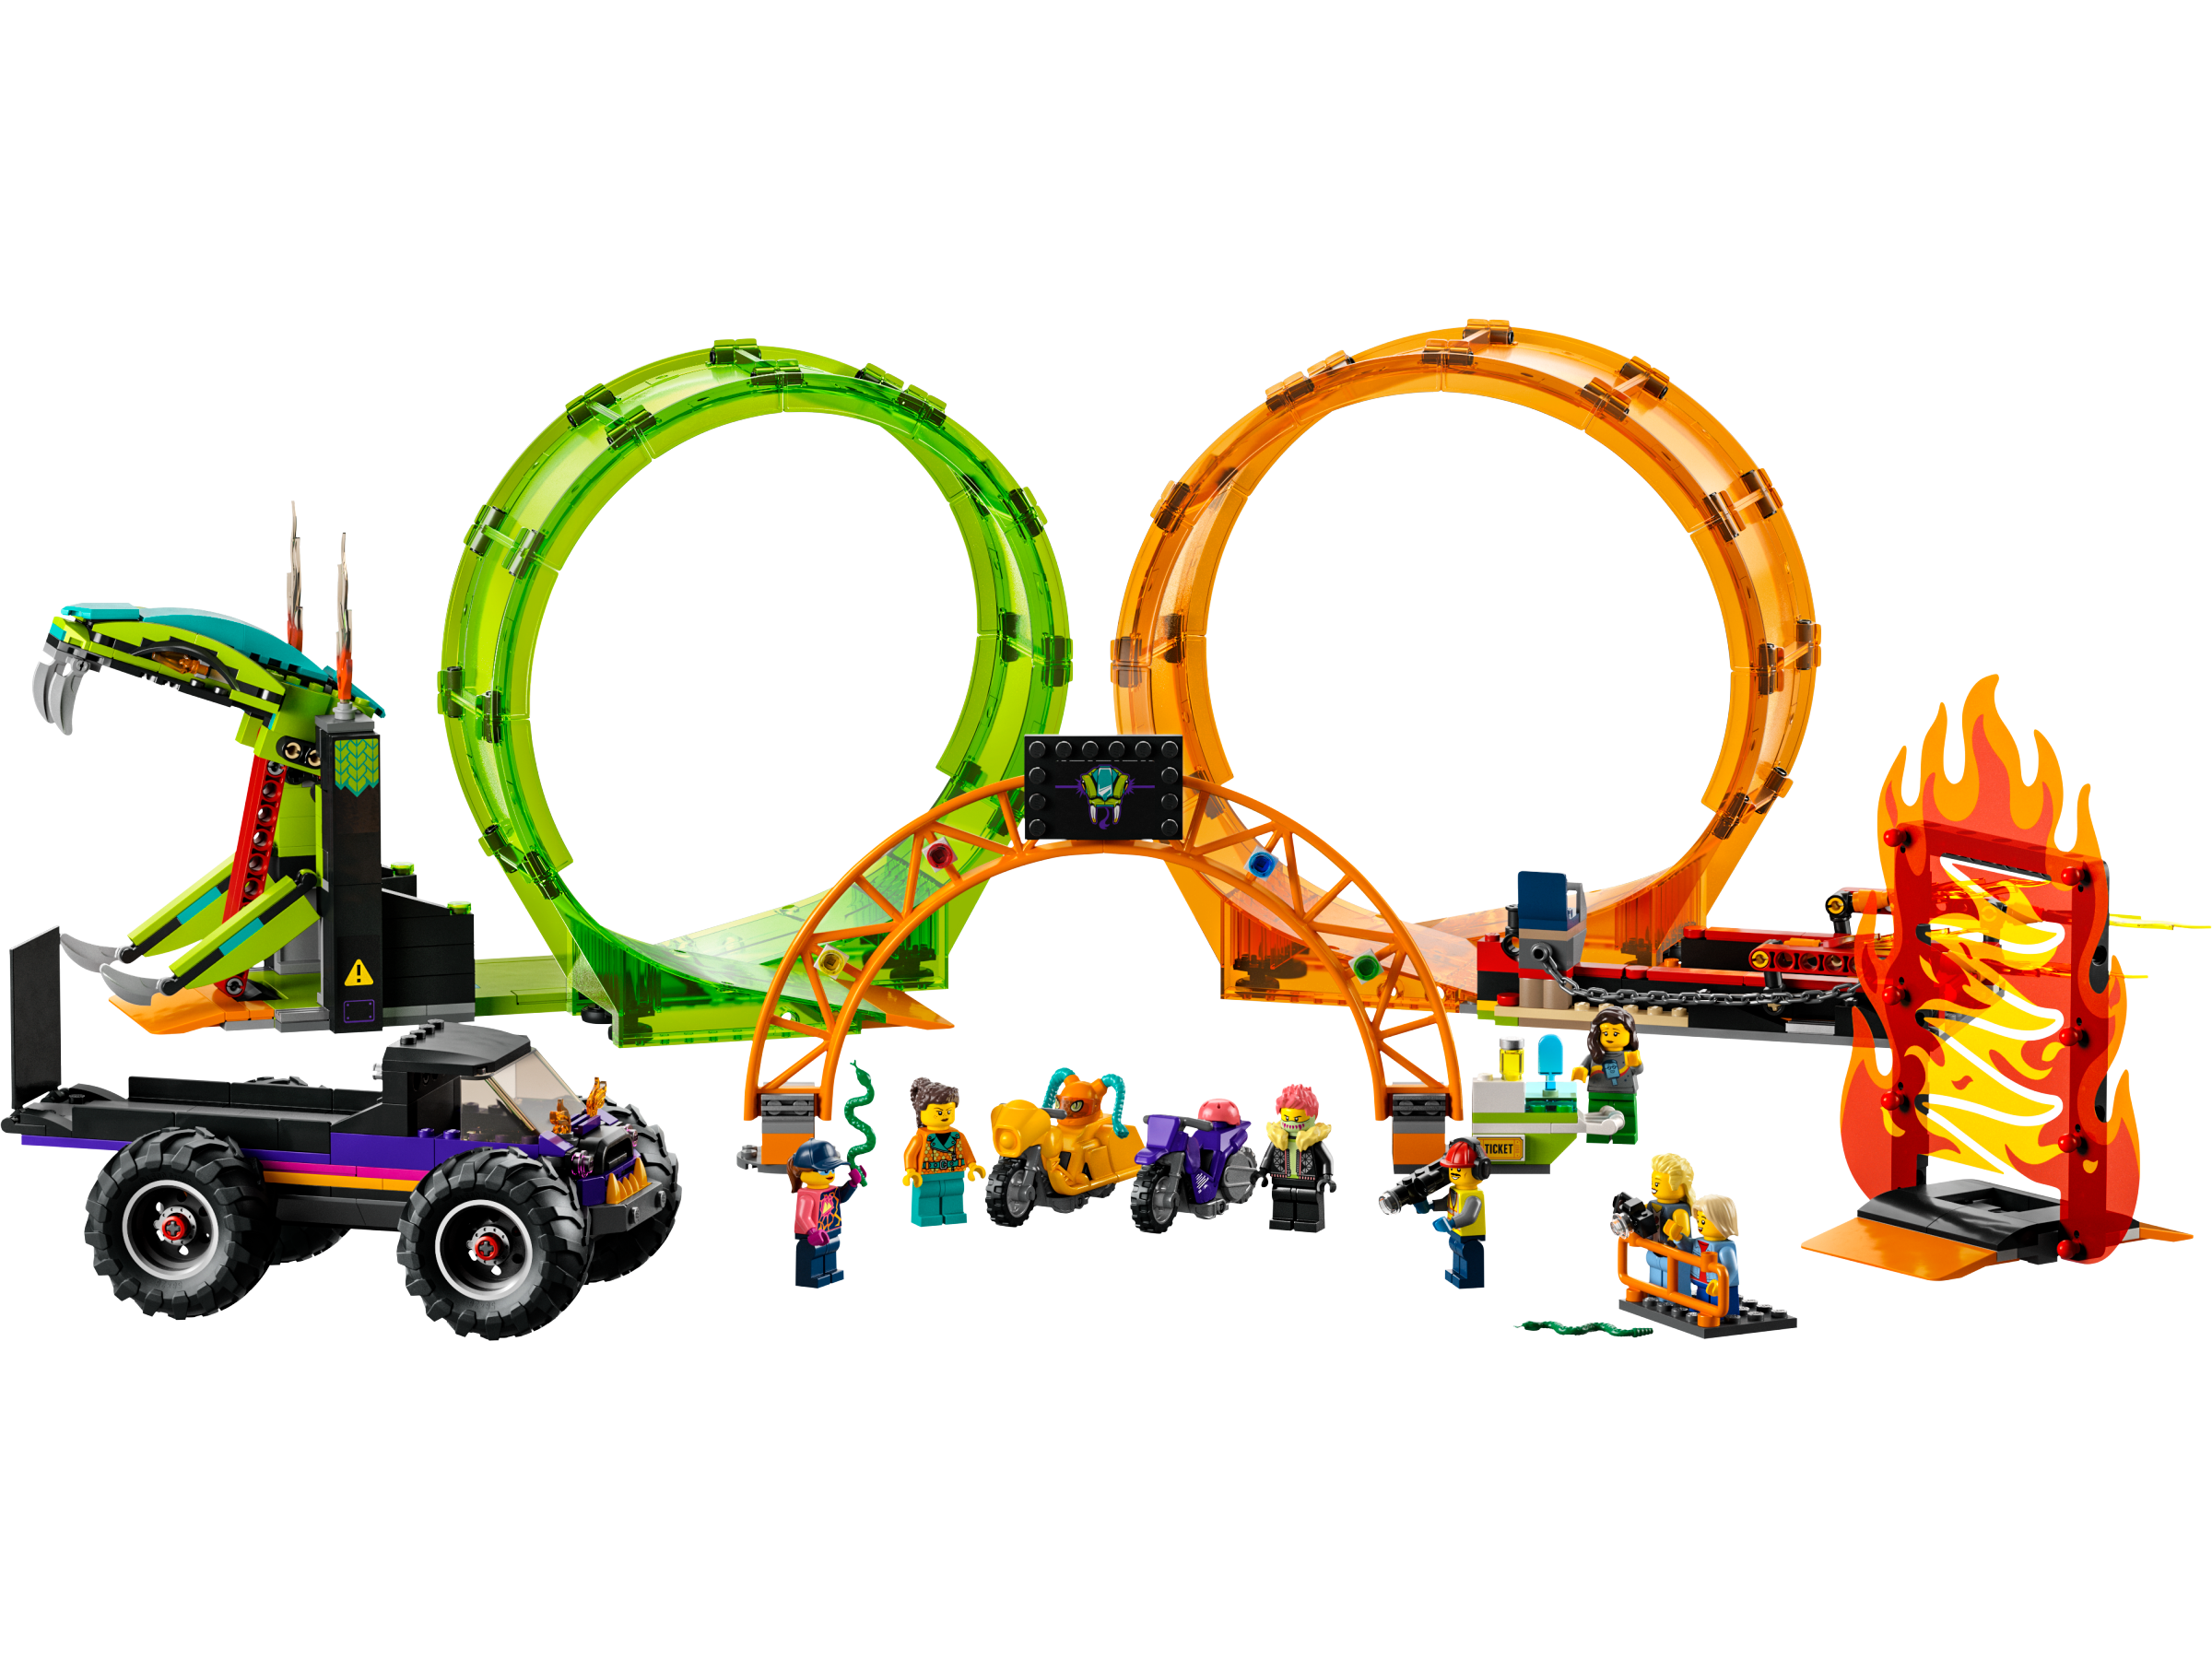 Double Loop Stunt Arena 60339 | City | Buy online at the - LEGO